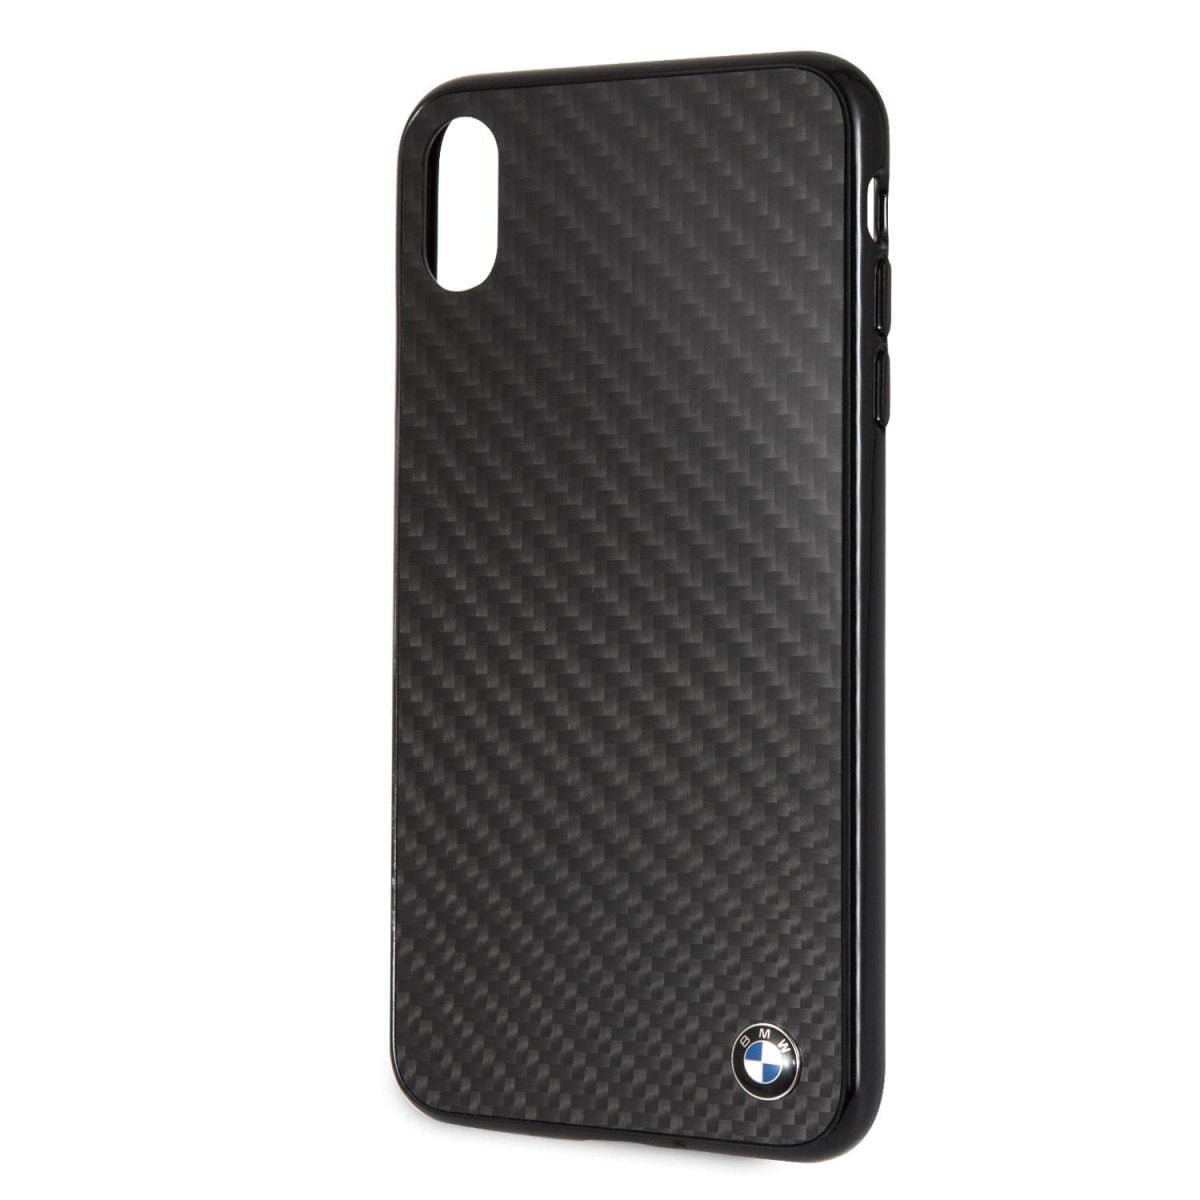 Cg Mobile Bmw Iphone Xs Max Case Black Carbon Hard Cell Phone Case Carbon Fiber Easily Accessible Ports Officially Licensed 03 Iphone Case Iphone Xs Black Carbon Fiber (Bmw)